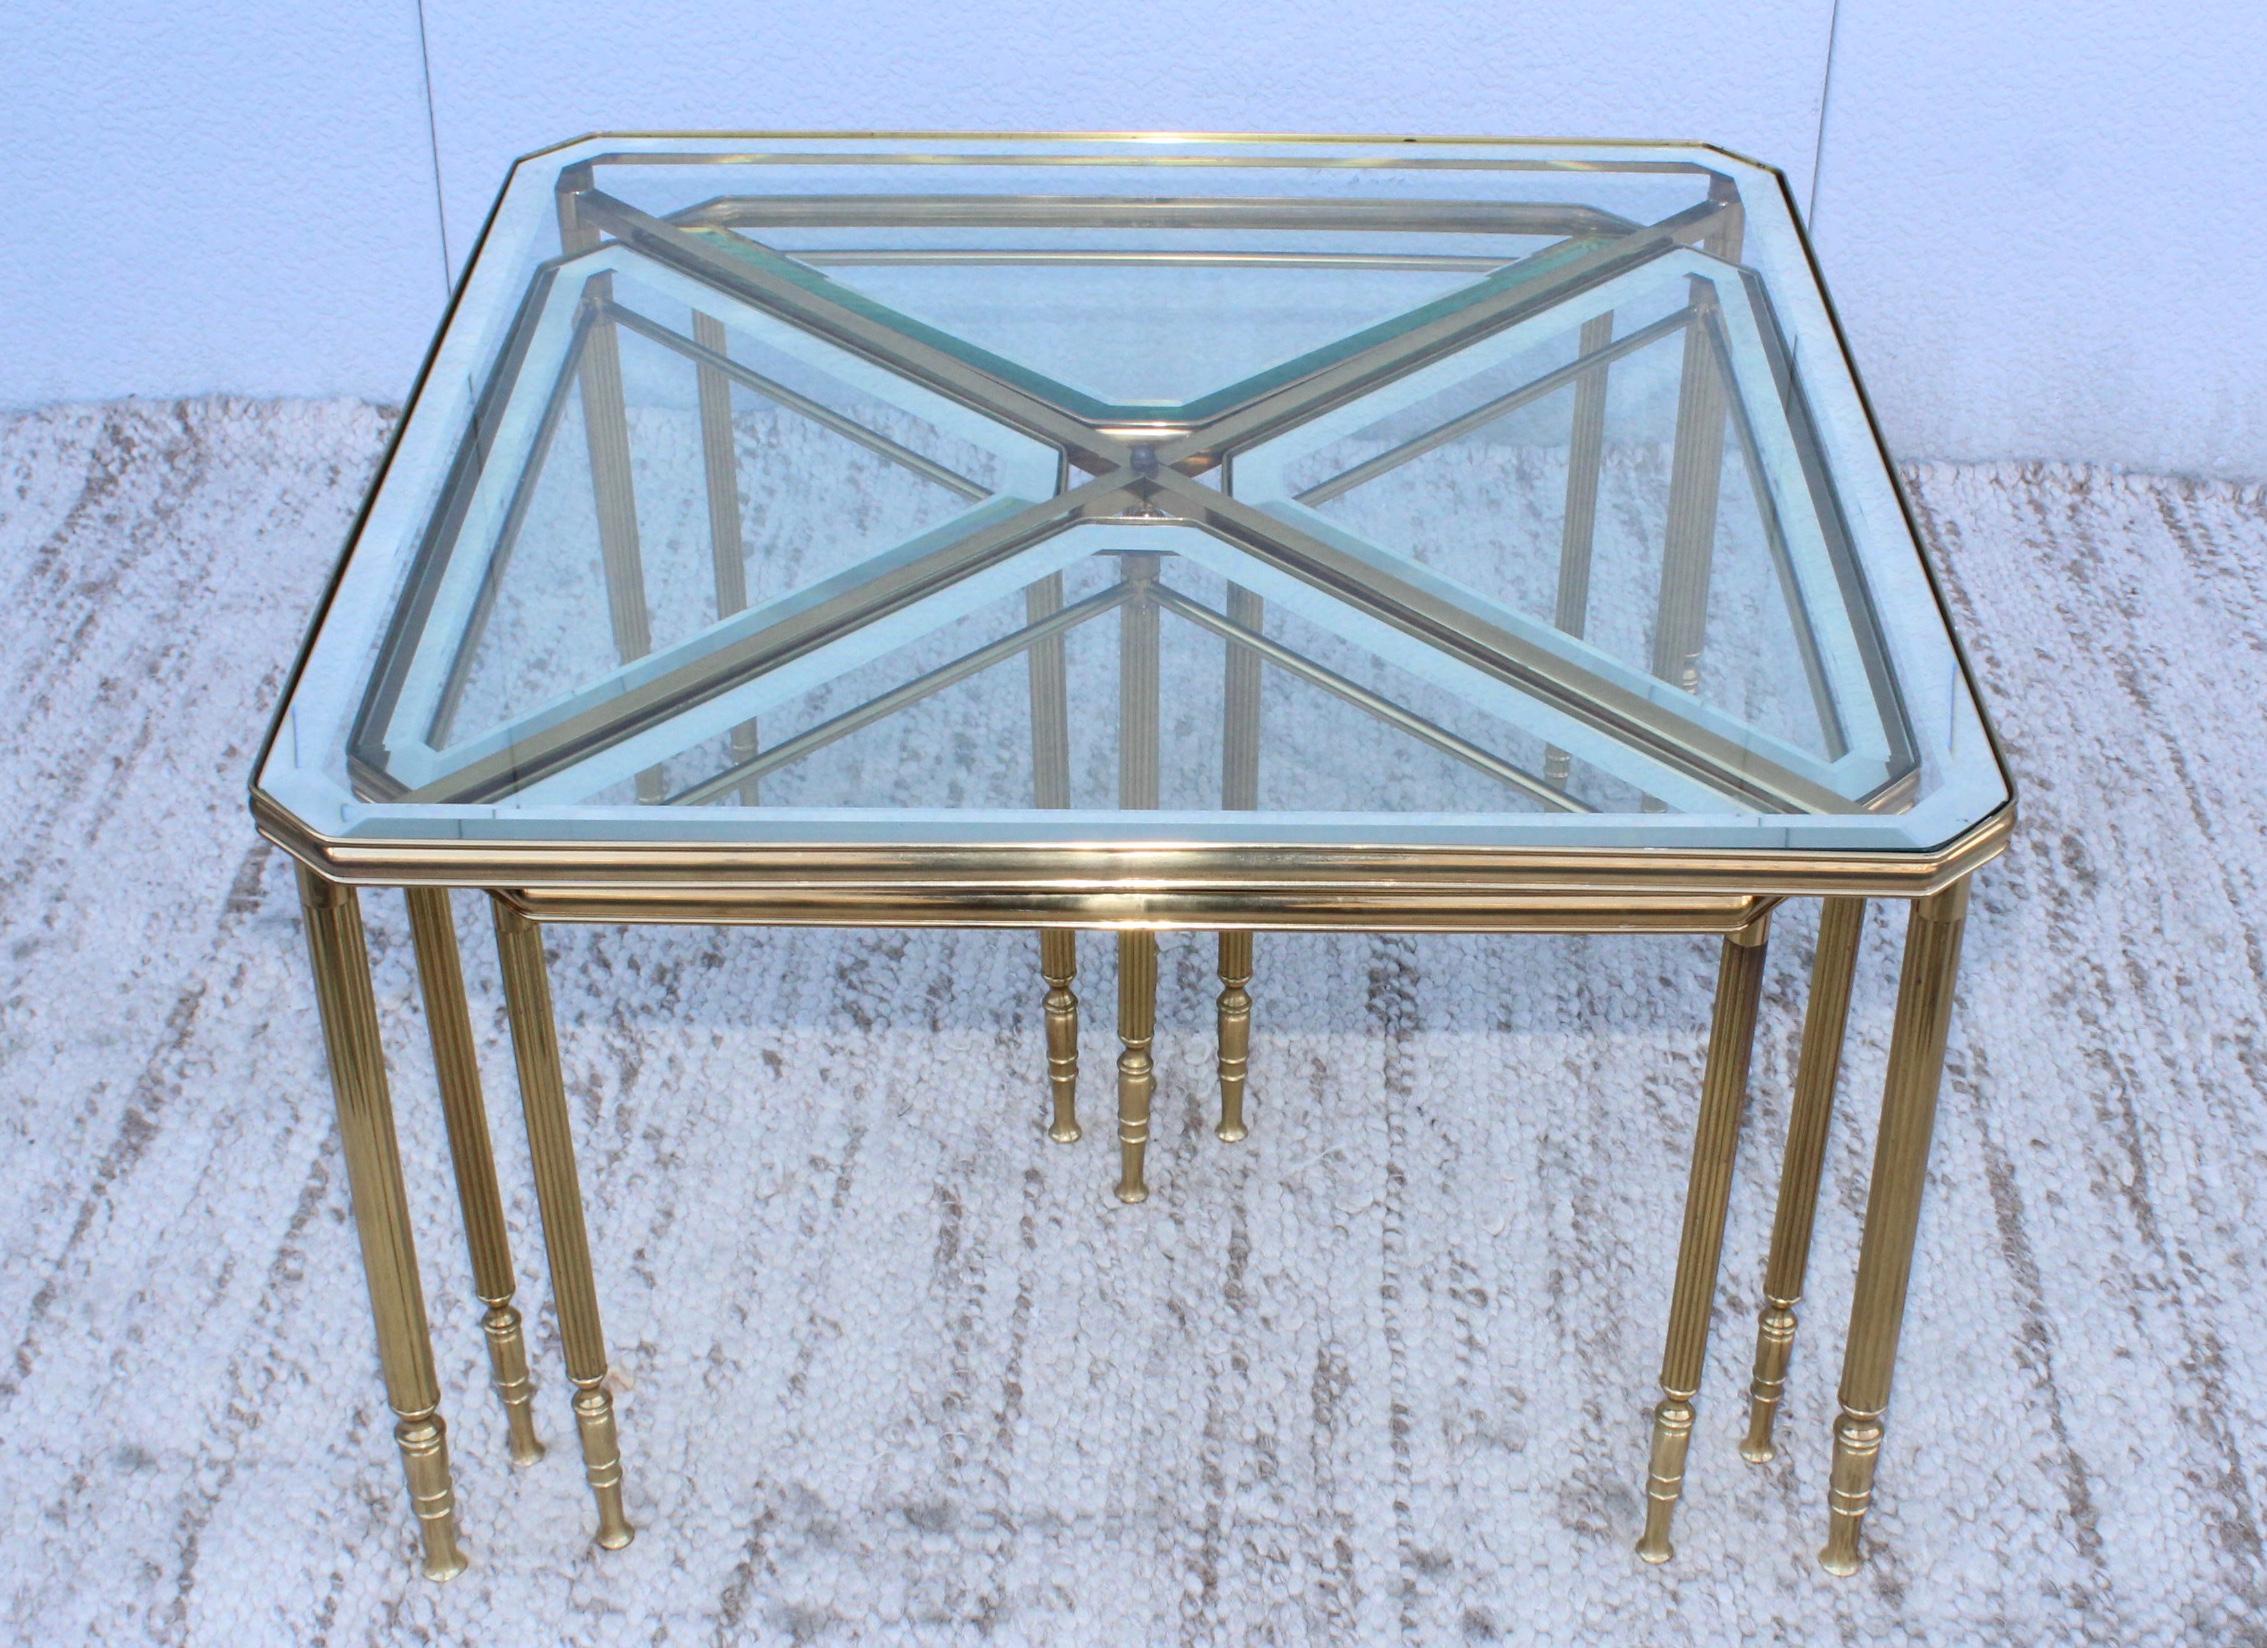 1950's Mid-Century Modern Italian Brass Coffee Table with Nesting Side Tables 2